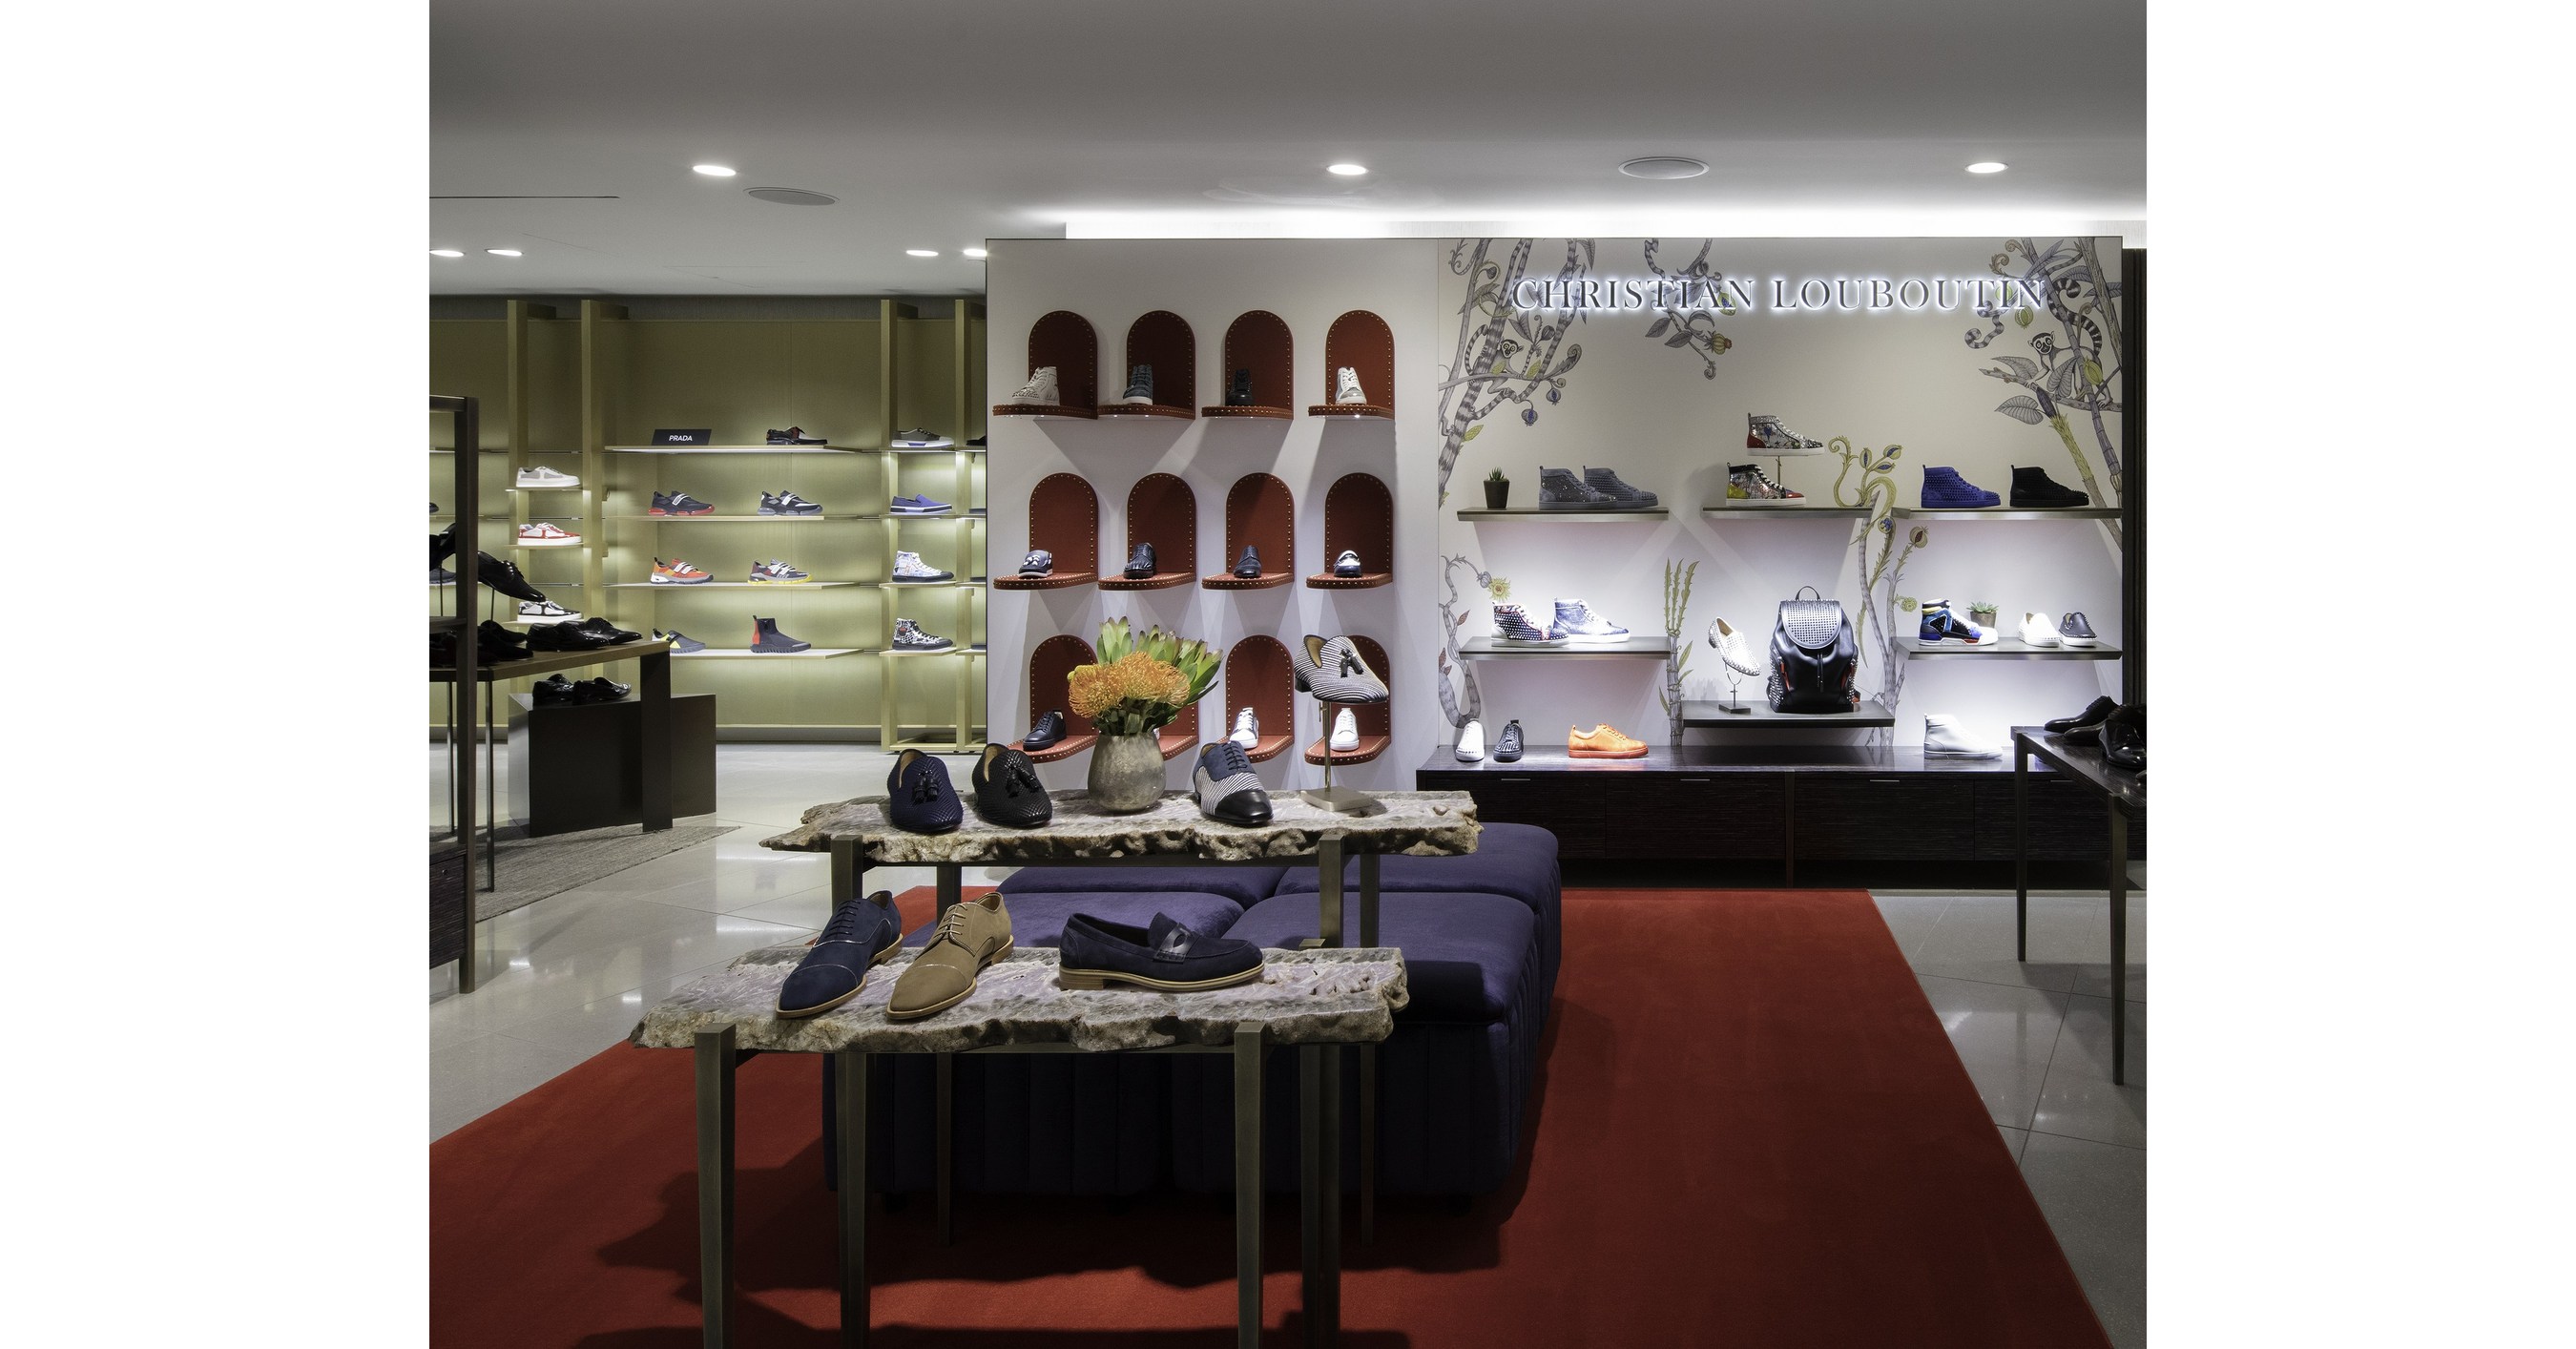 A martini and a new suit: Nordstrom's swanky flagship store